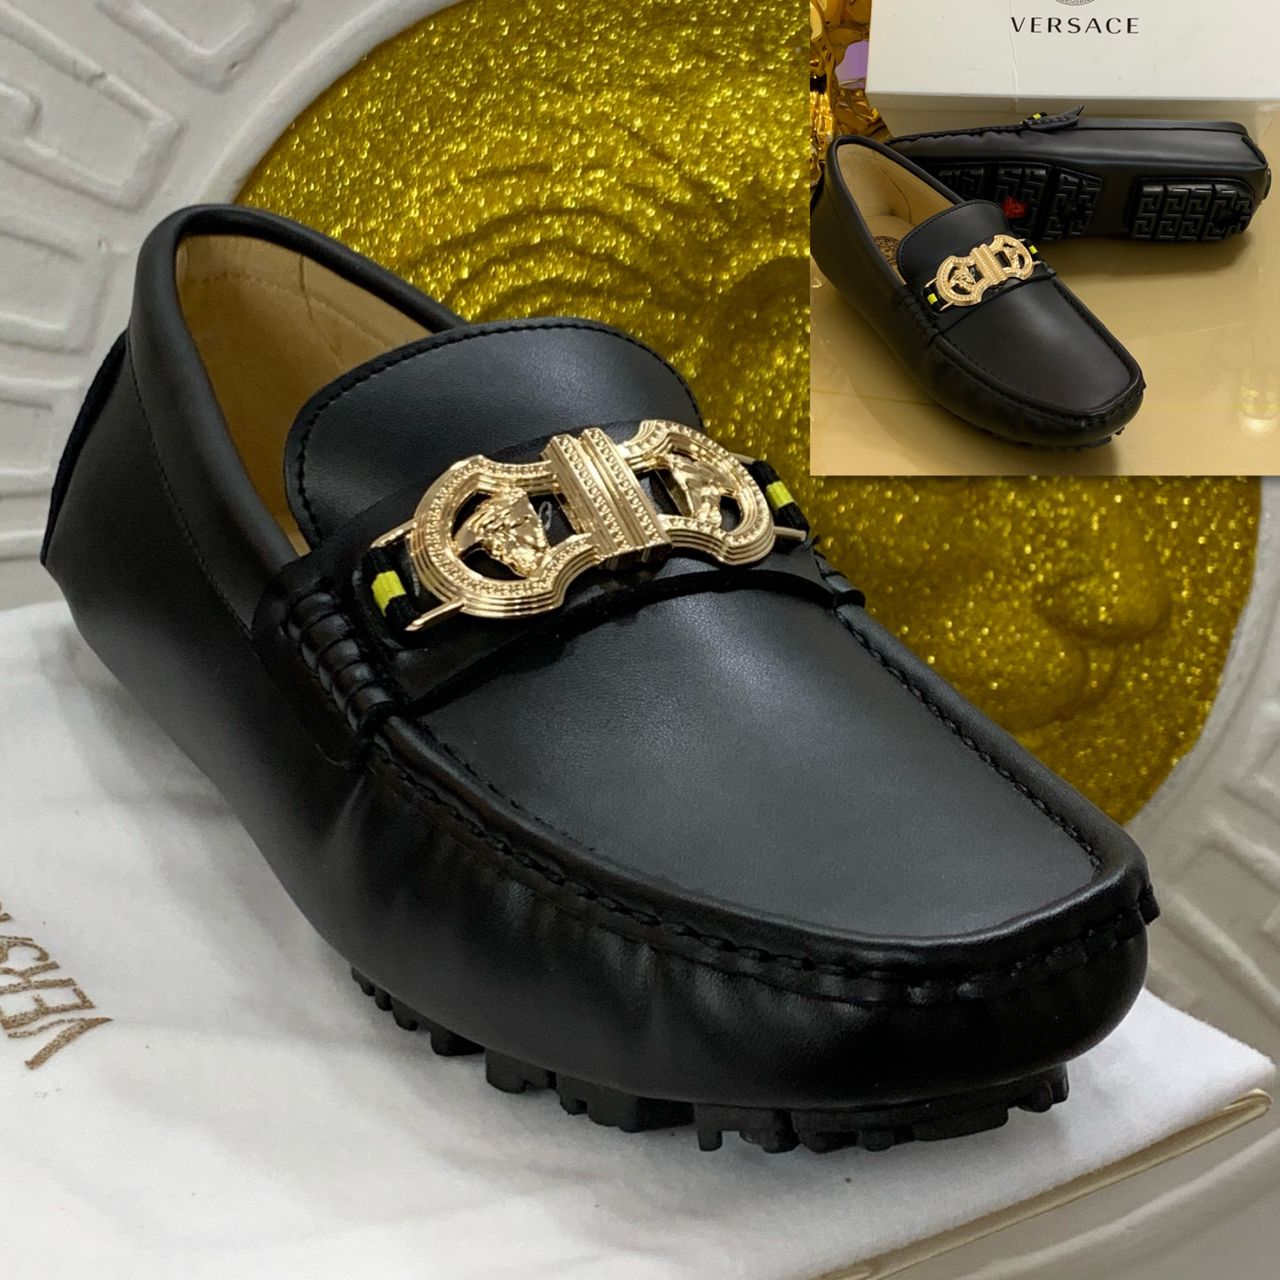 SHINY FORMAL DESIGNERS LOAFER SHOES  CartRollers ﻿Online Marketplace  Shopping Store In Lagos Nigeria